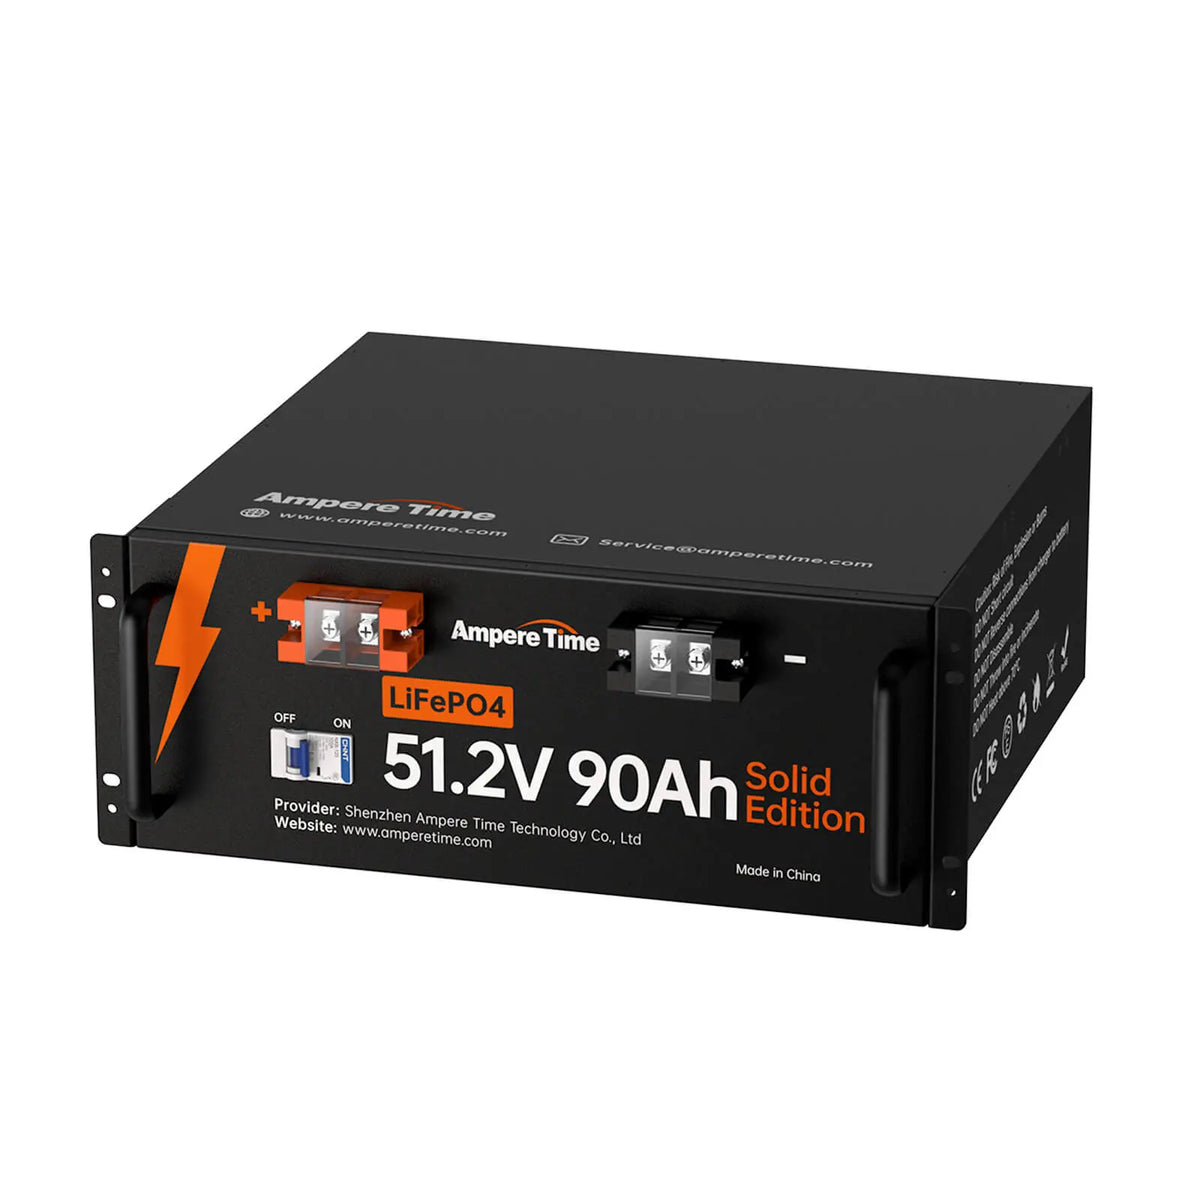 Ampere Time 48(51.2)V 90Ah Server Rack Battery, 4608Wh Lithium LiFePO4 Battery & Built-in 90A BMS